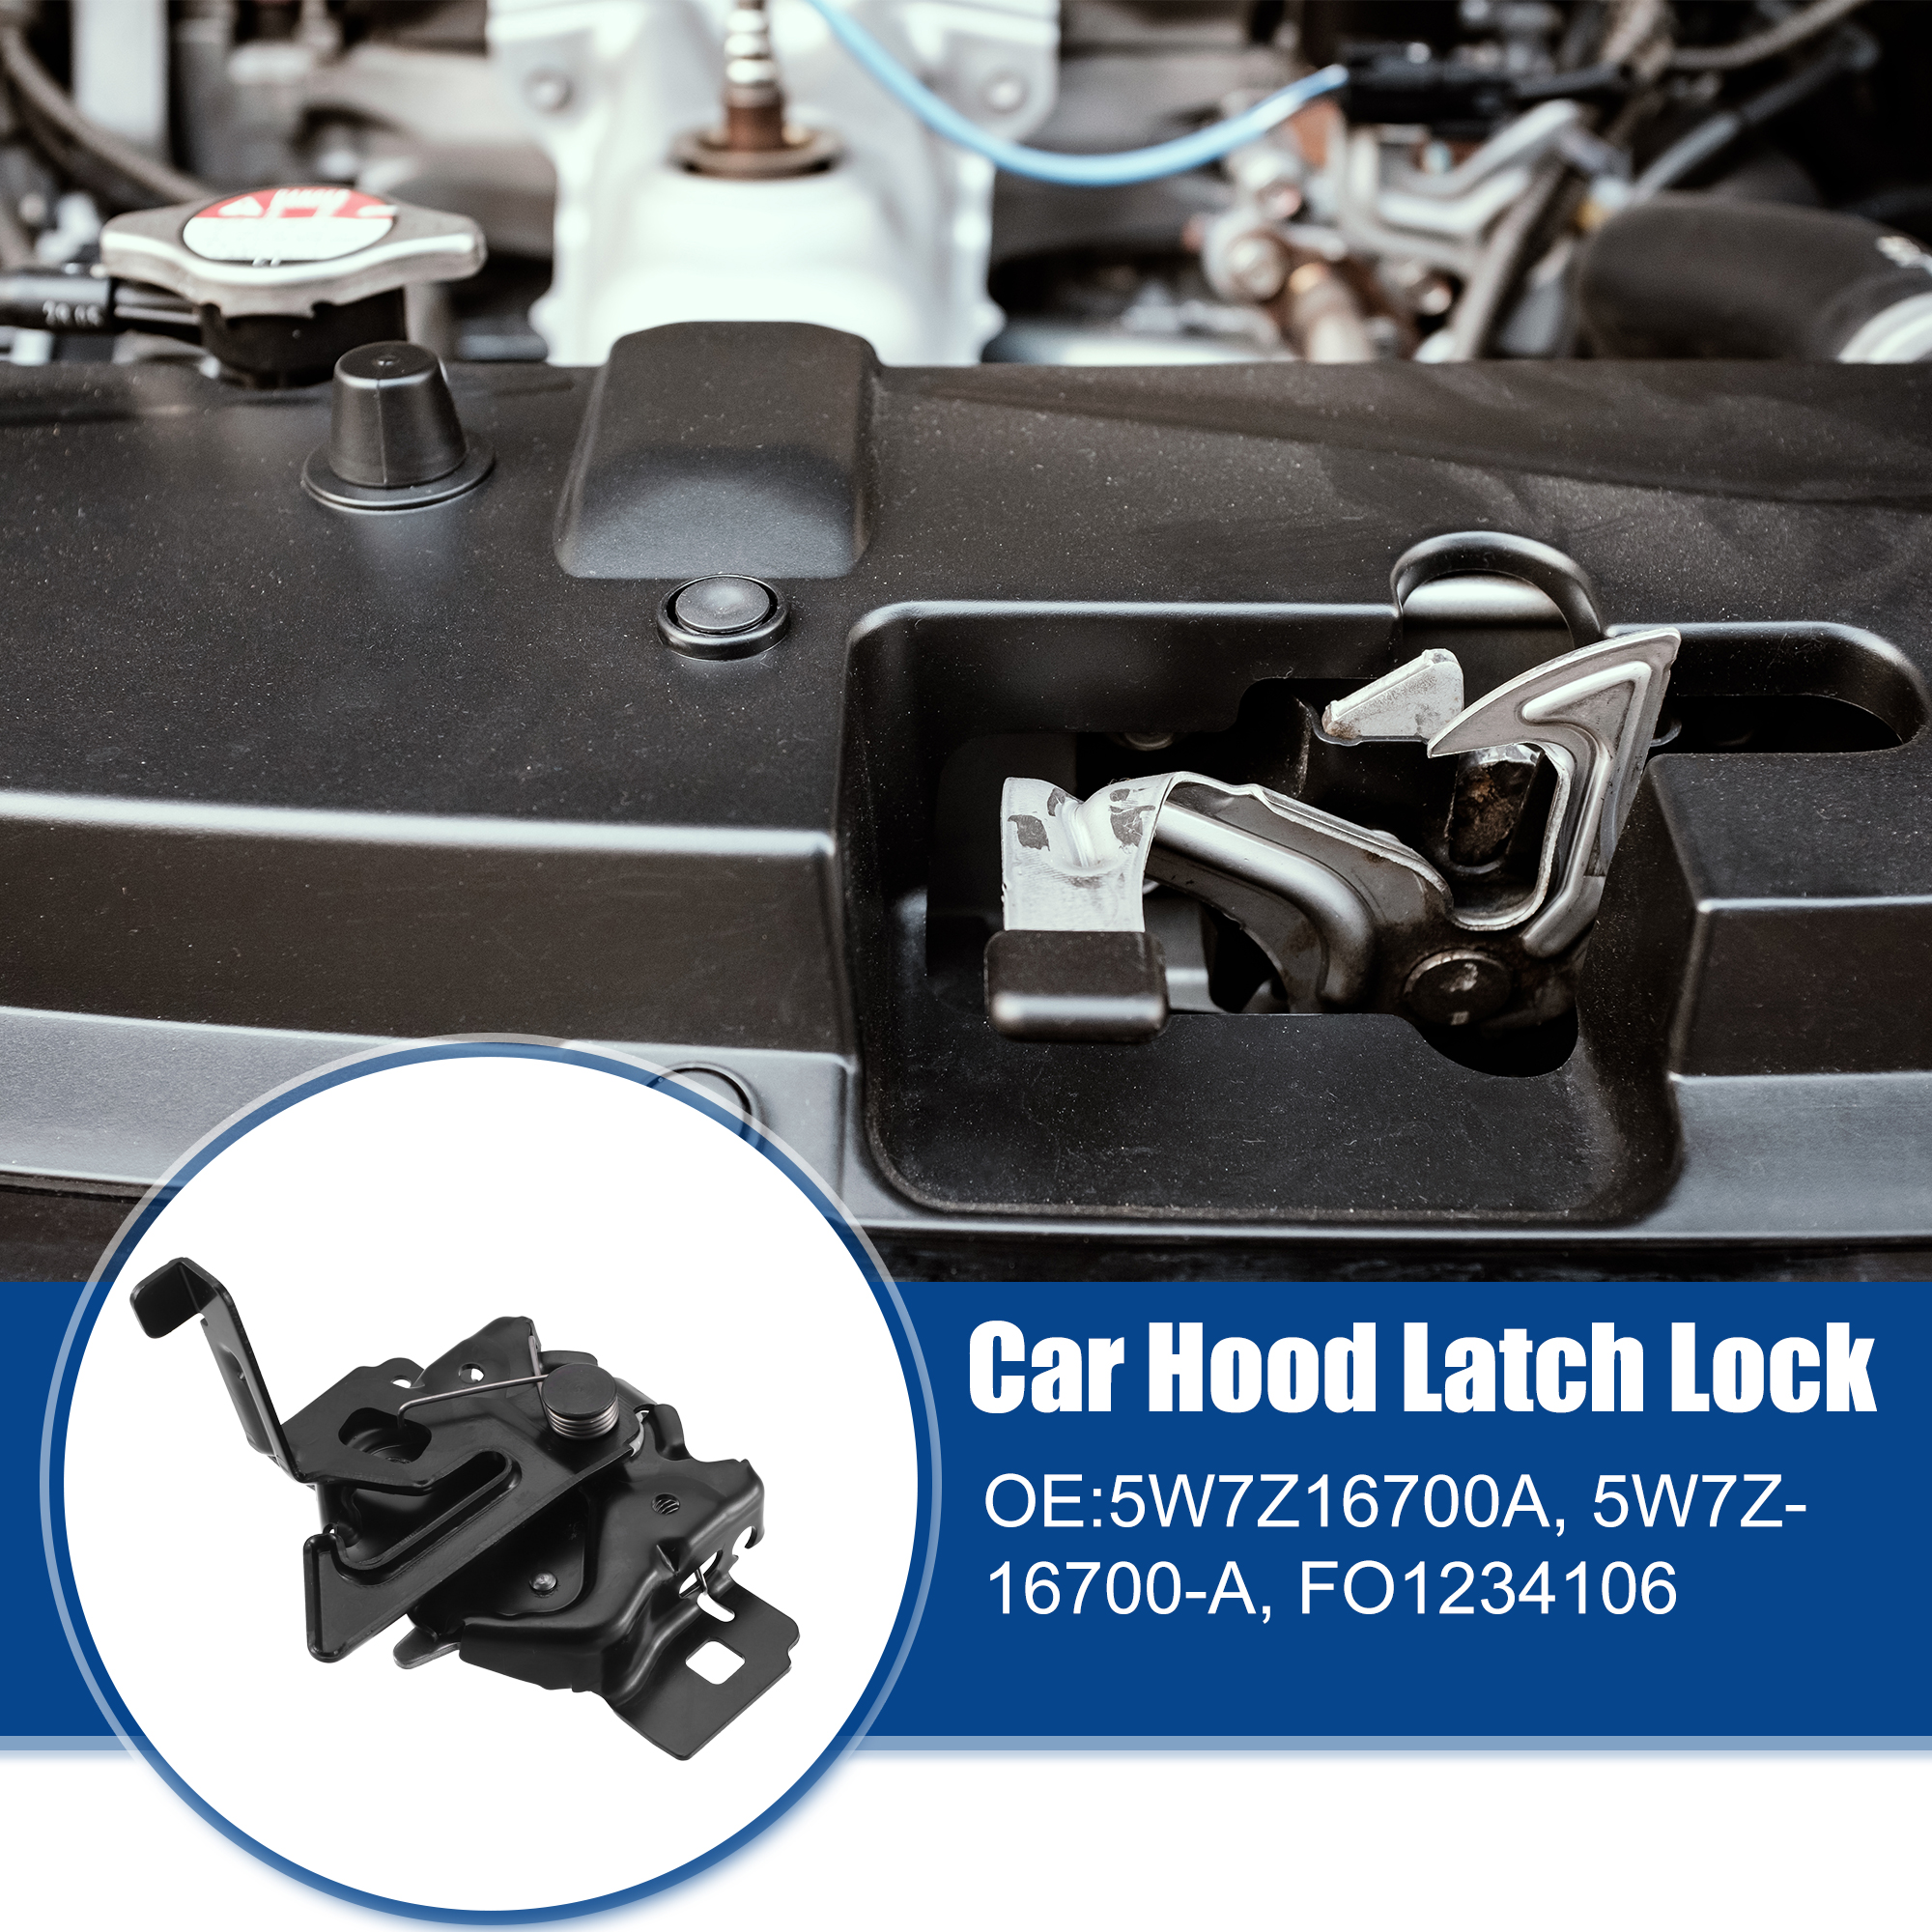 Unique Bargains 5W7Z-16700-A Car Hood Latch Lock Assembly for Ford Crown Victoria 1998-2011